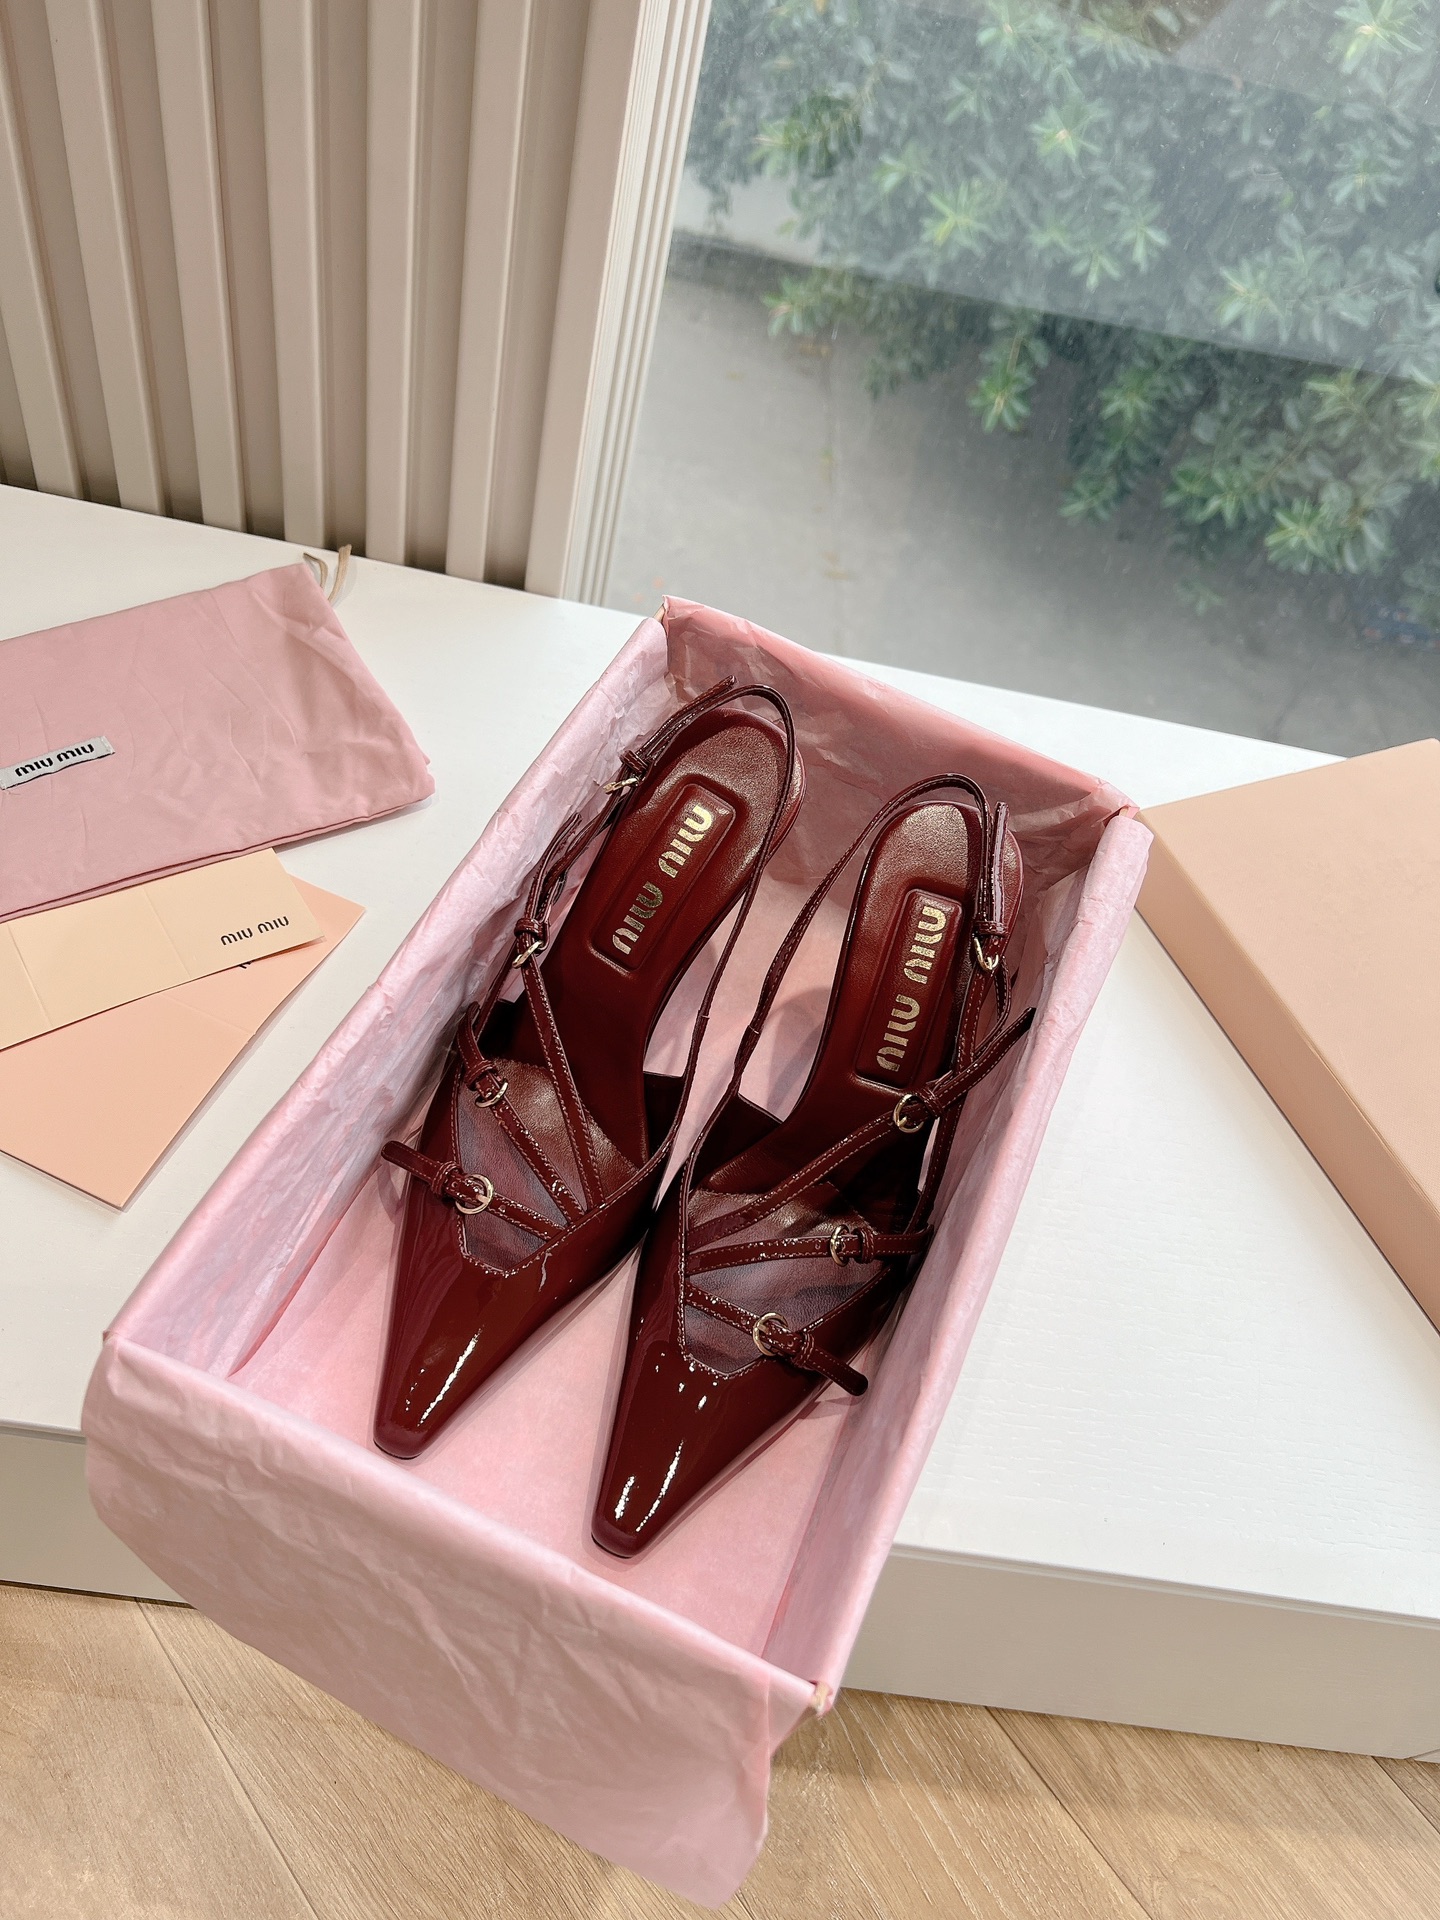 MiuMiu High Heel Pumps Sandals Single Layer Shoes 2023 Replica Wholesale Cheap Sales Online
 Openwork Patent Leather Sheepskin Spring/Summer Collection